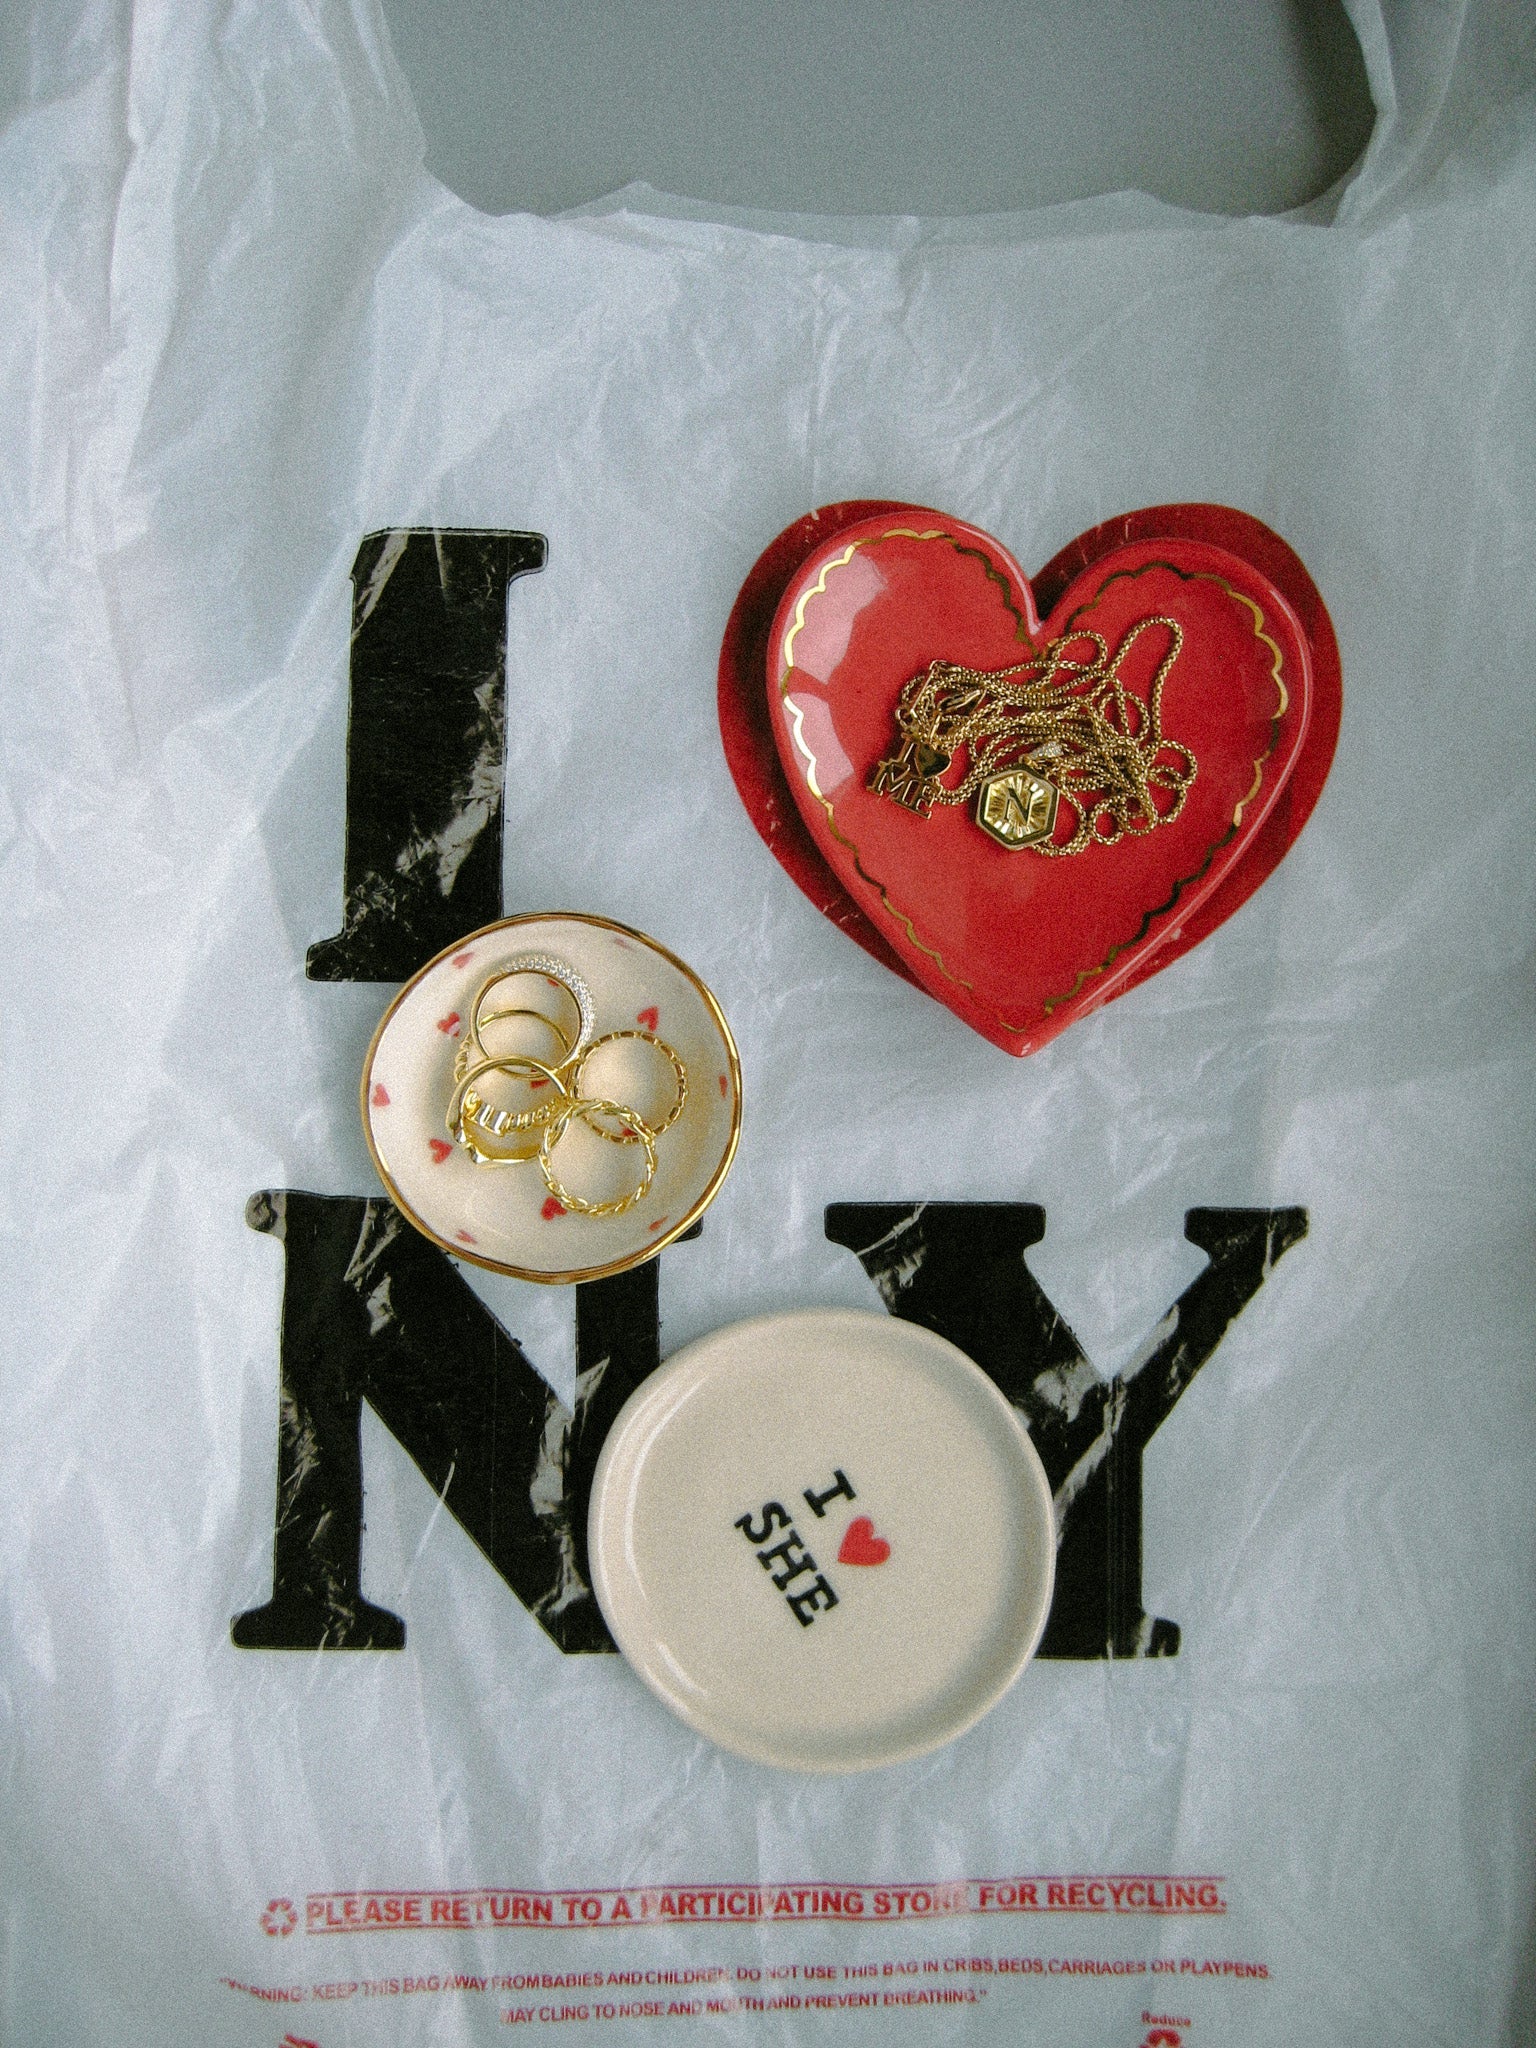 Dotted Heart Ring Tray